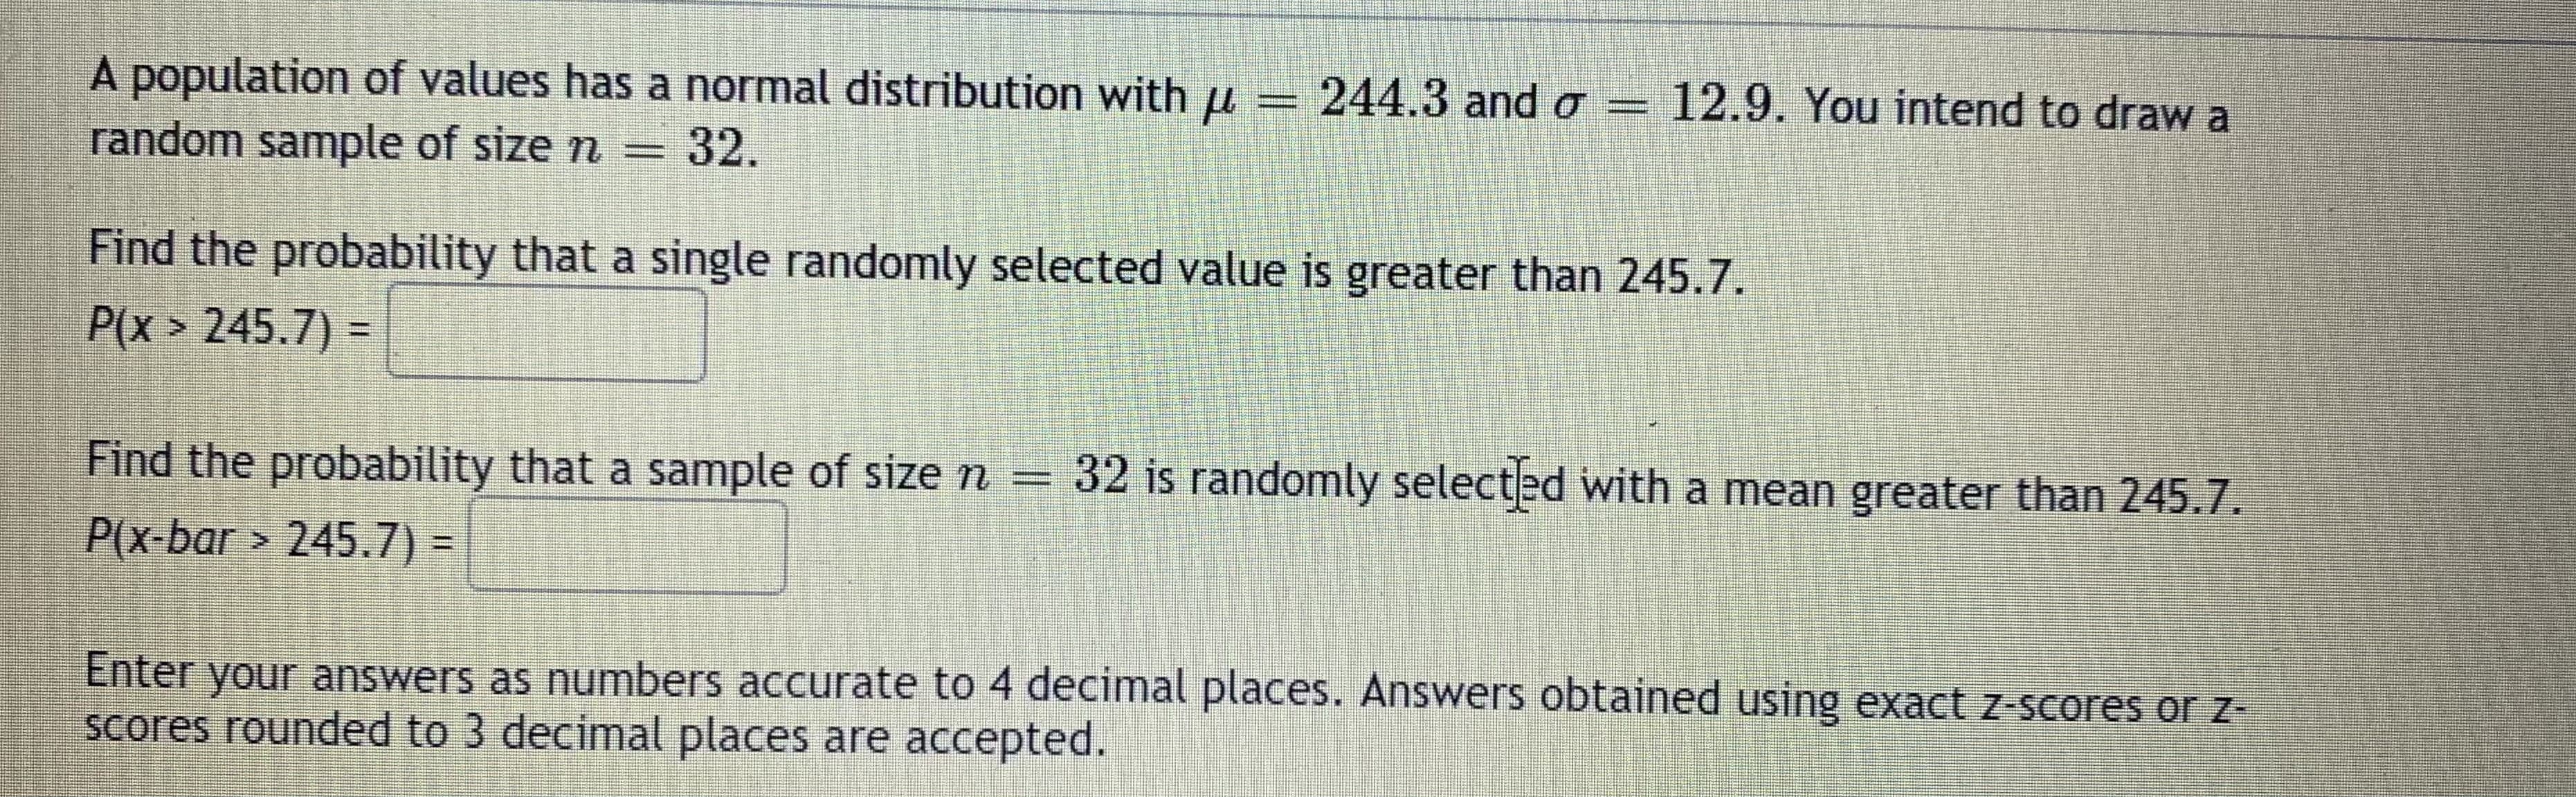 A population of values has a normal distribution with u = 244.3 and o = 12.9. You intend to draw a
random sample of size n
= 32.
